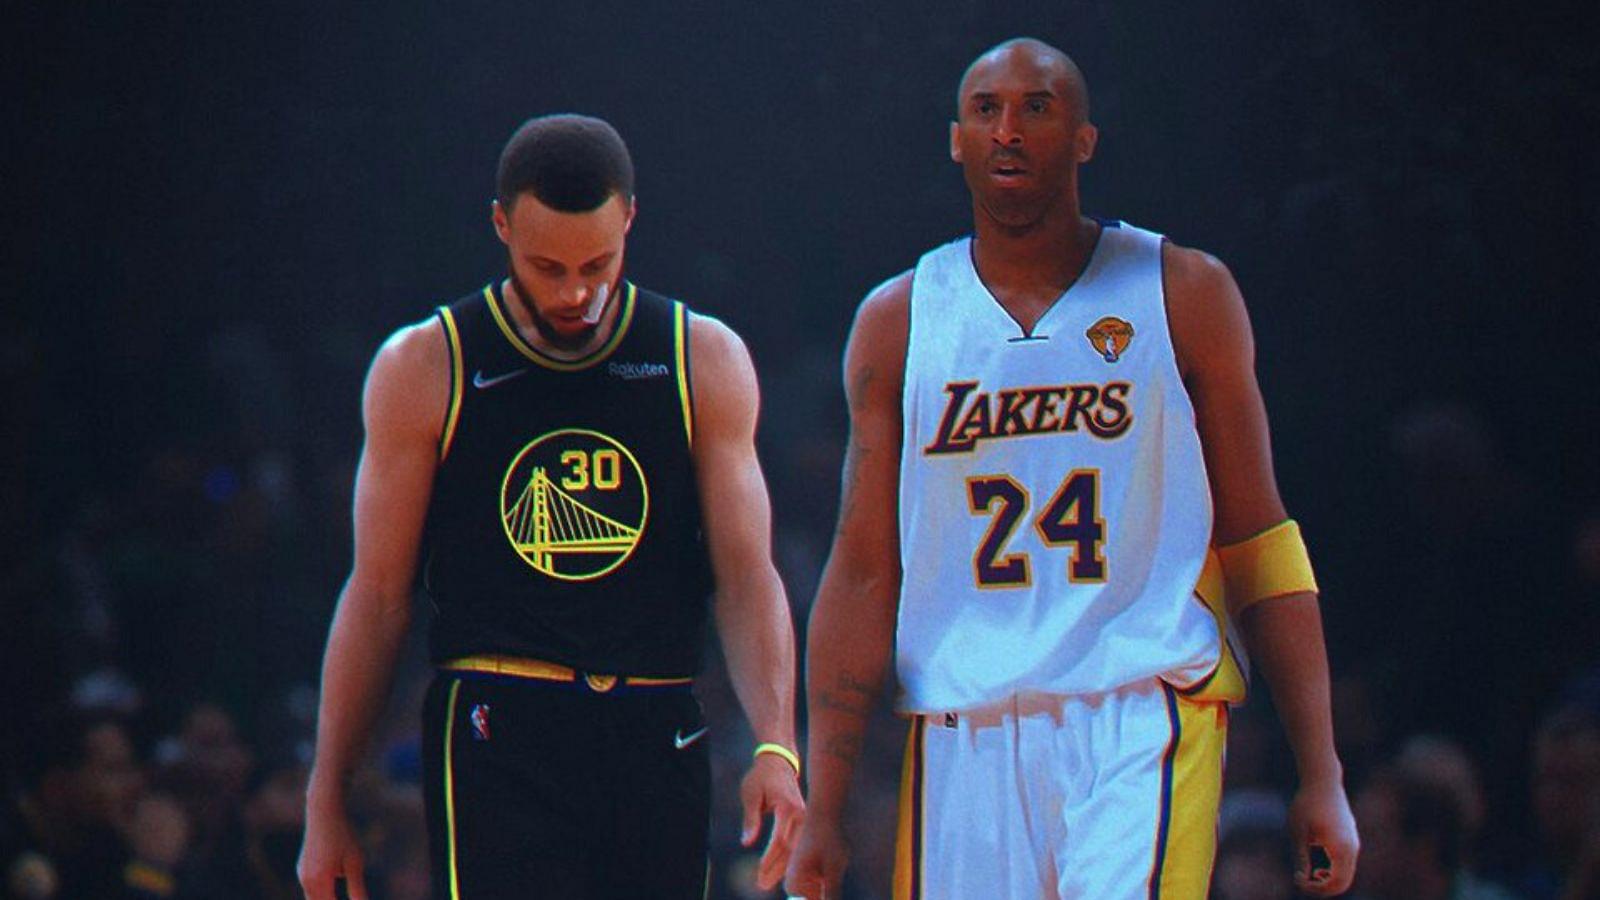 “The difference between Kobe Bryant and Steph Curry is .. a Hall of Fame career”: NBA Twitter notices the huge gap in career achievements between Warriors guard and Lakers legend